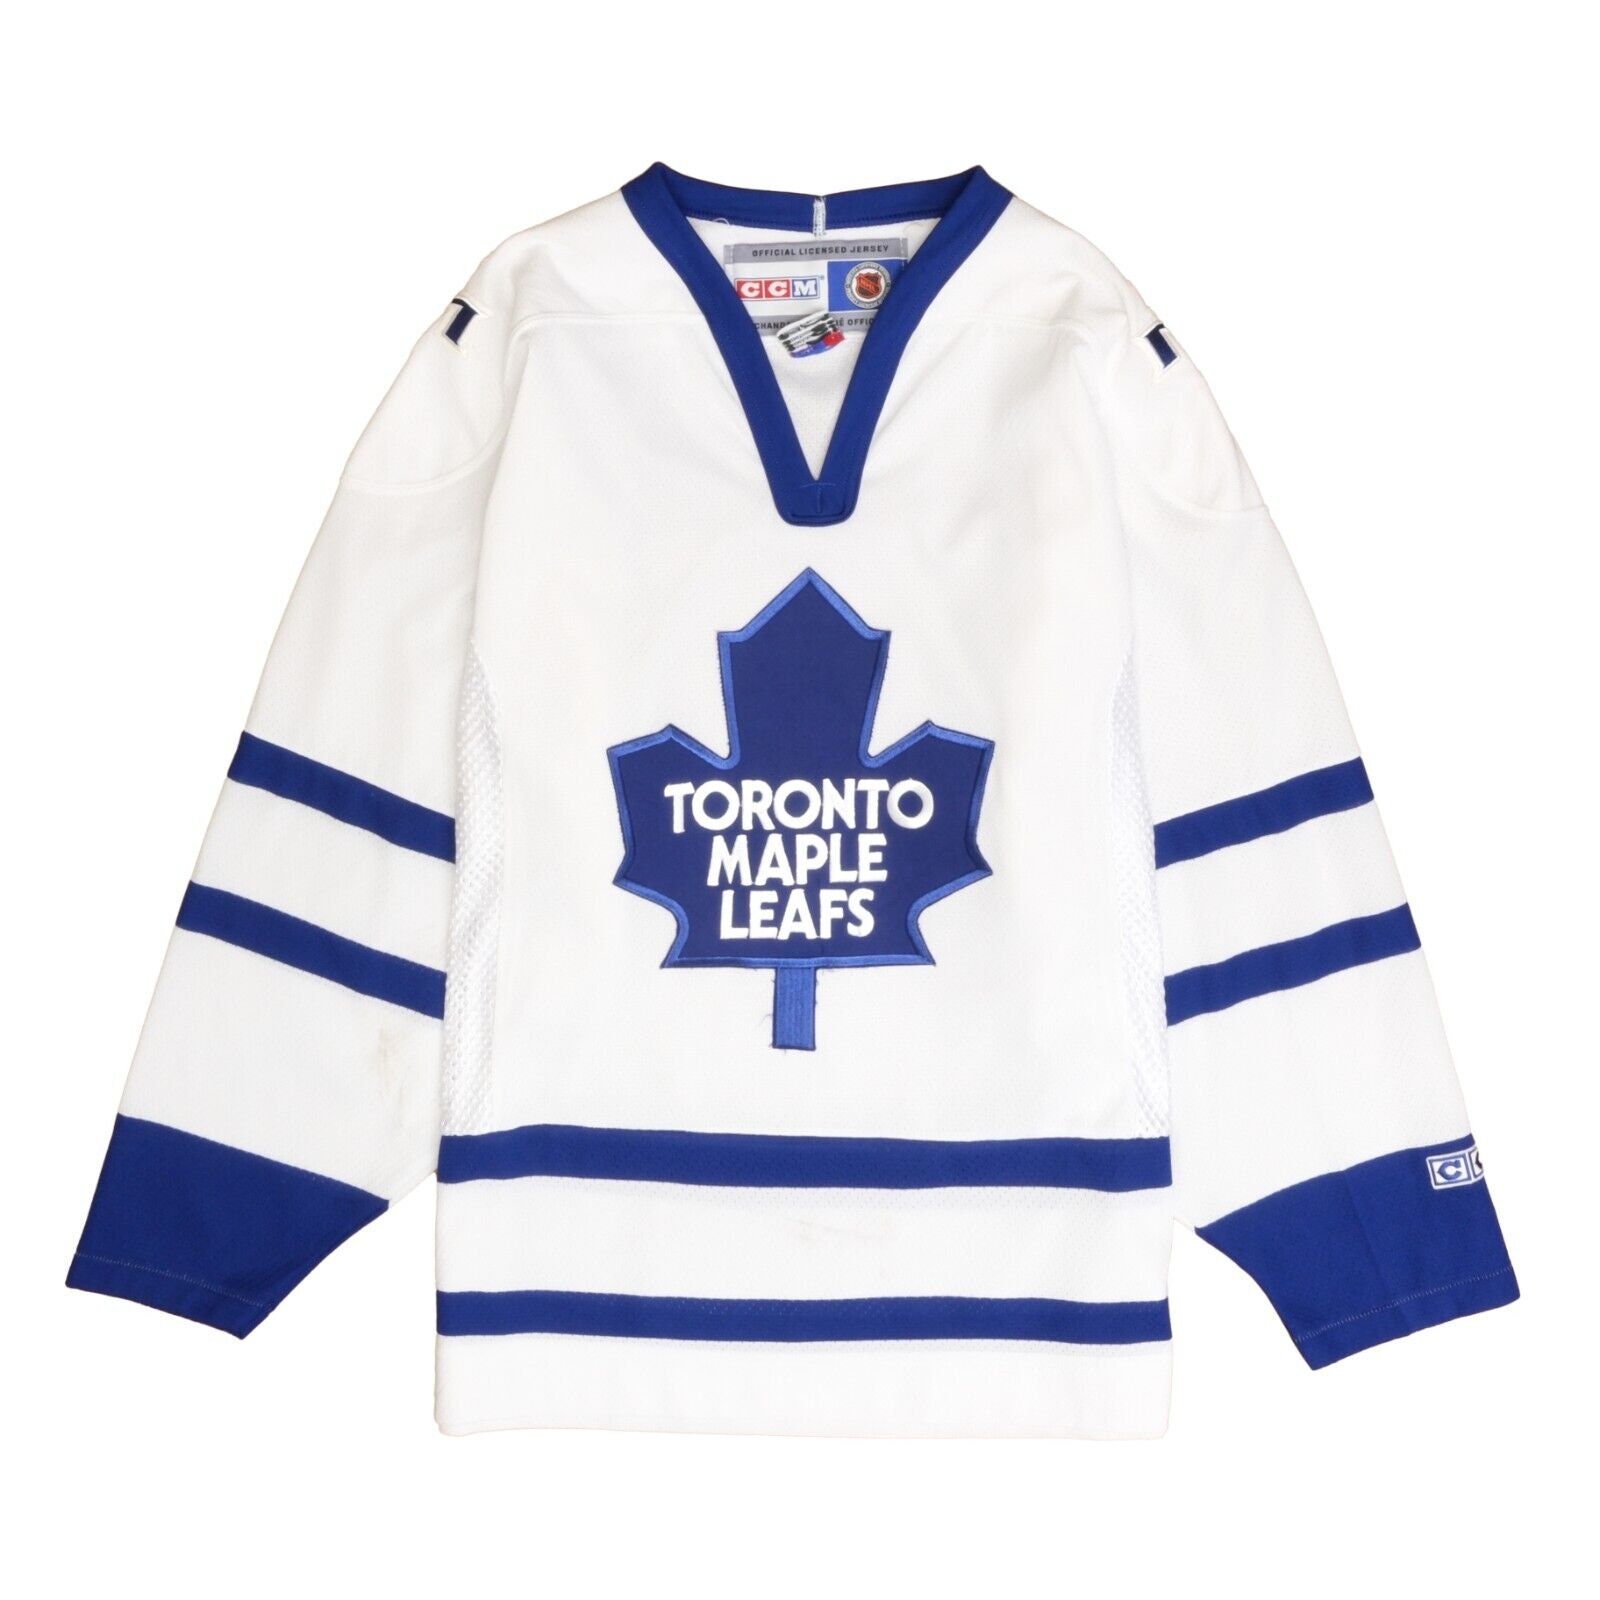 NHL Toronto Maple Leafs Official Licensed Jersey Black Reebok CCM